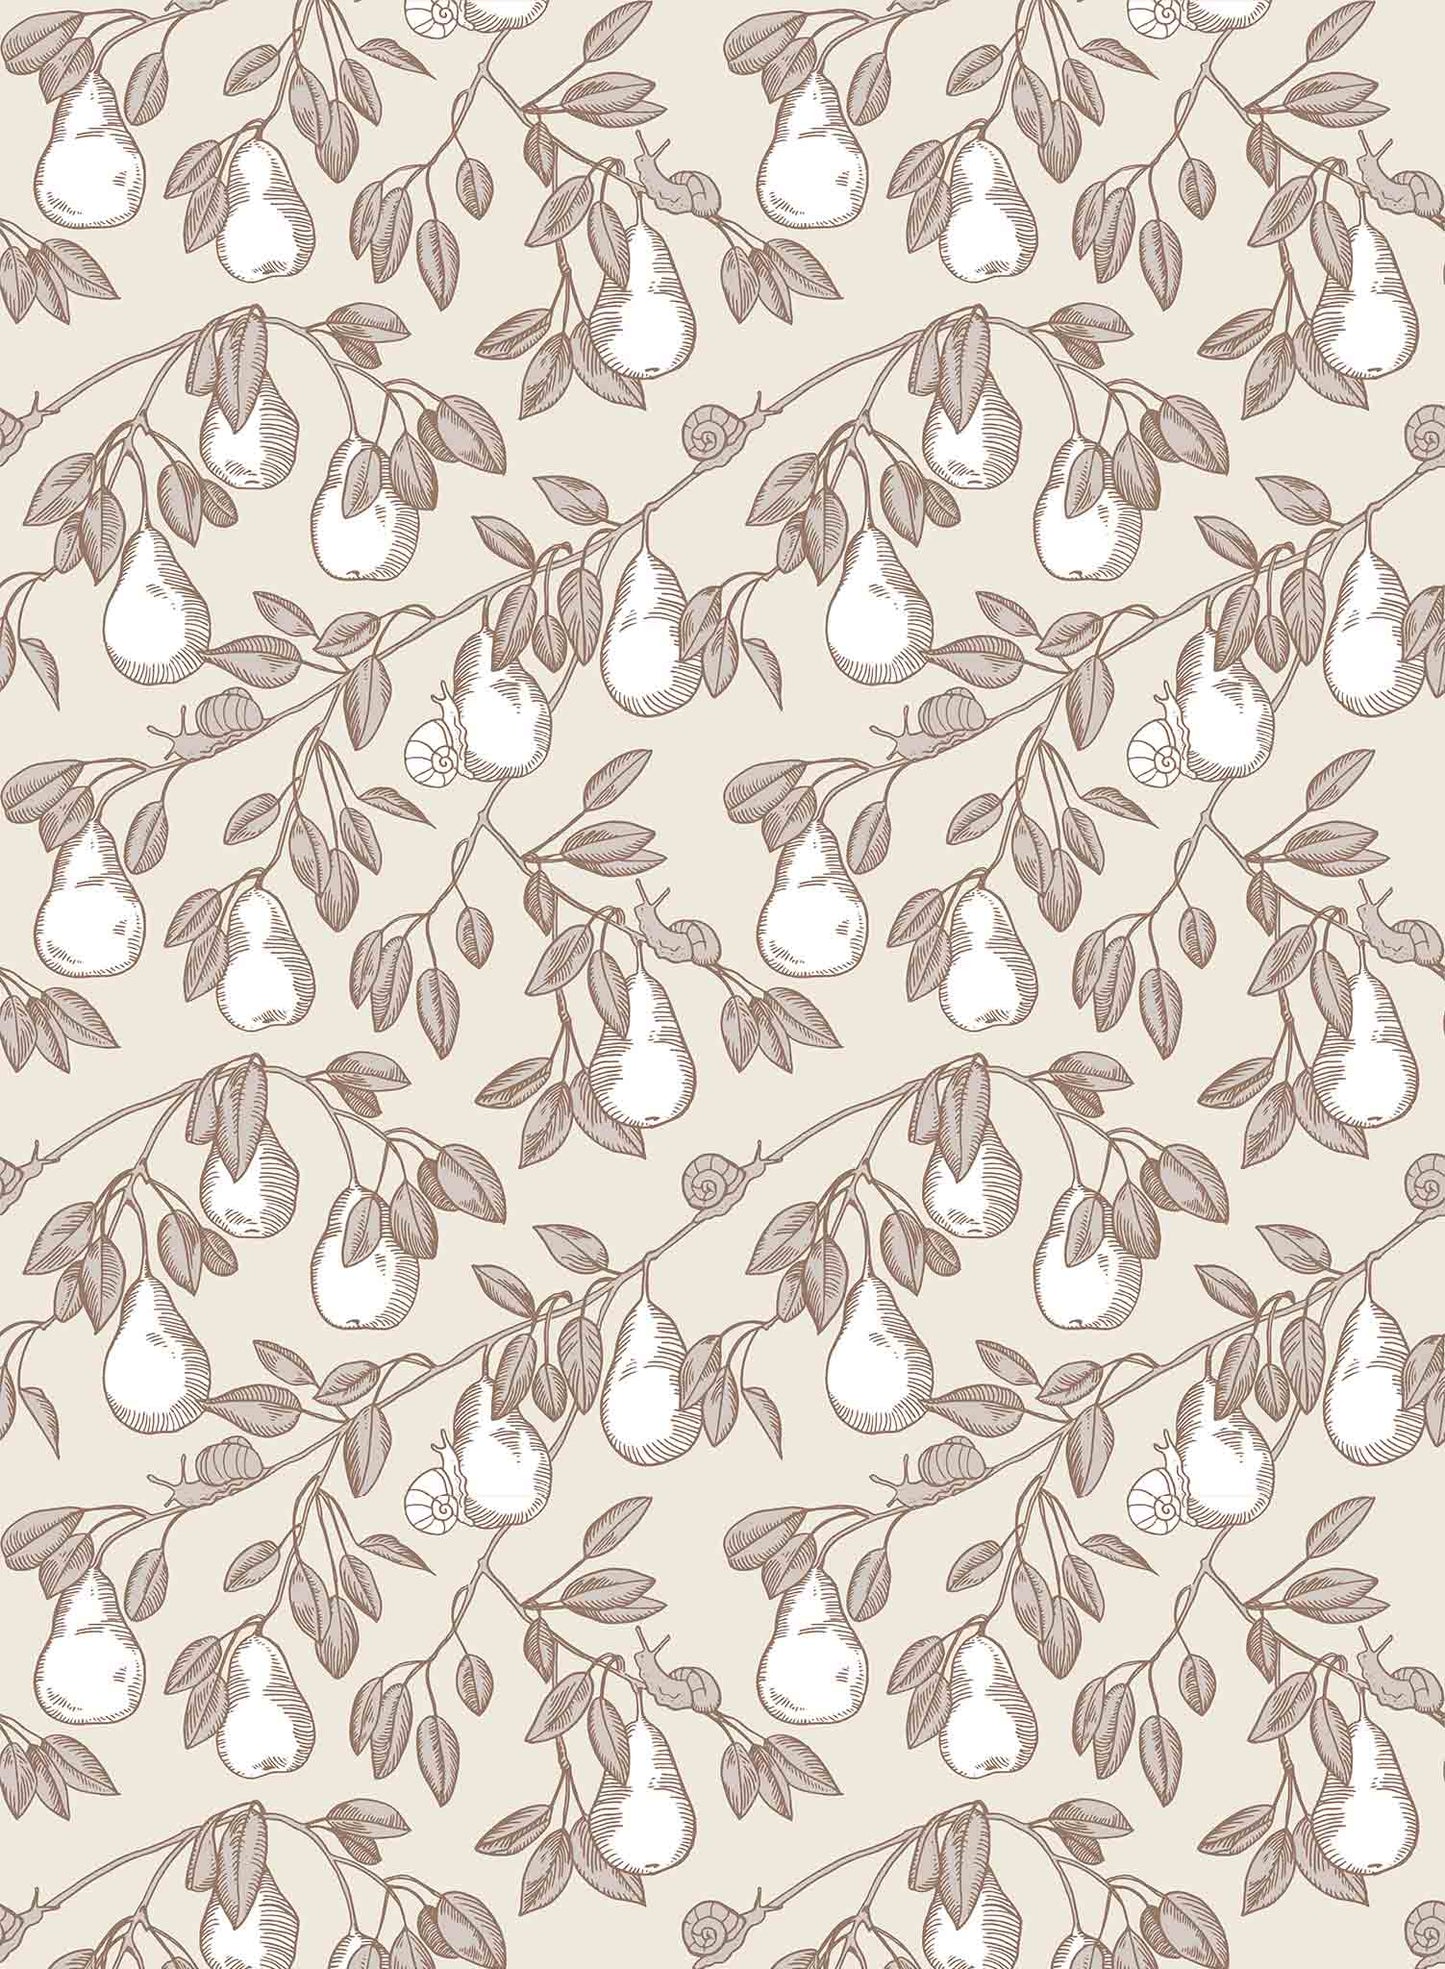 Pear Picking is a minimalist wallpaper by Opposite Wall of a series of pears hanging from its tree.